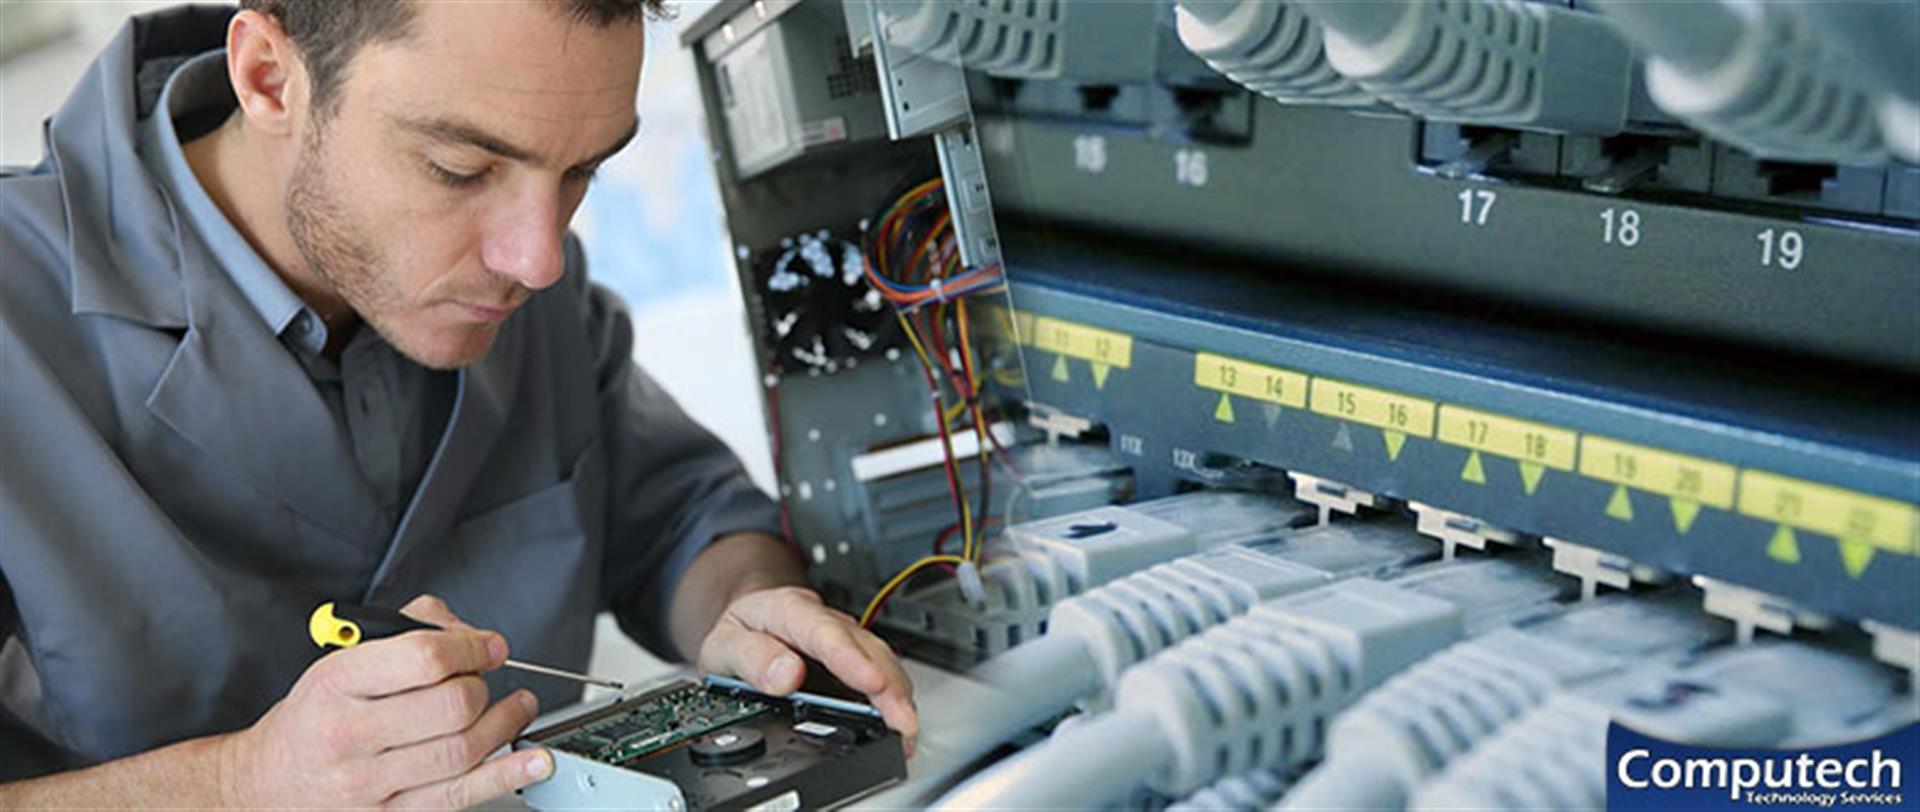 Eloy Arizona Onsite Computer & Printer Repairs, Networking, Voice and High Speed Data Wiring Services